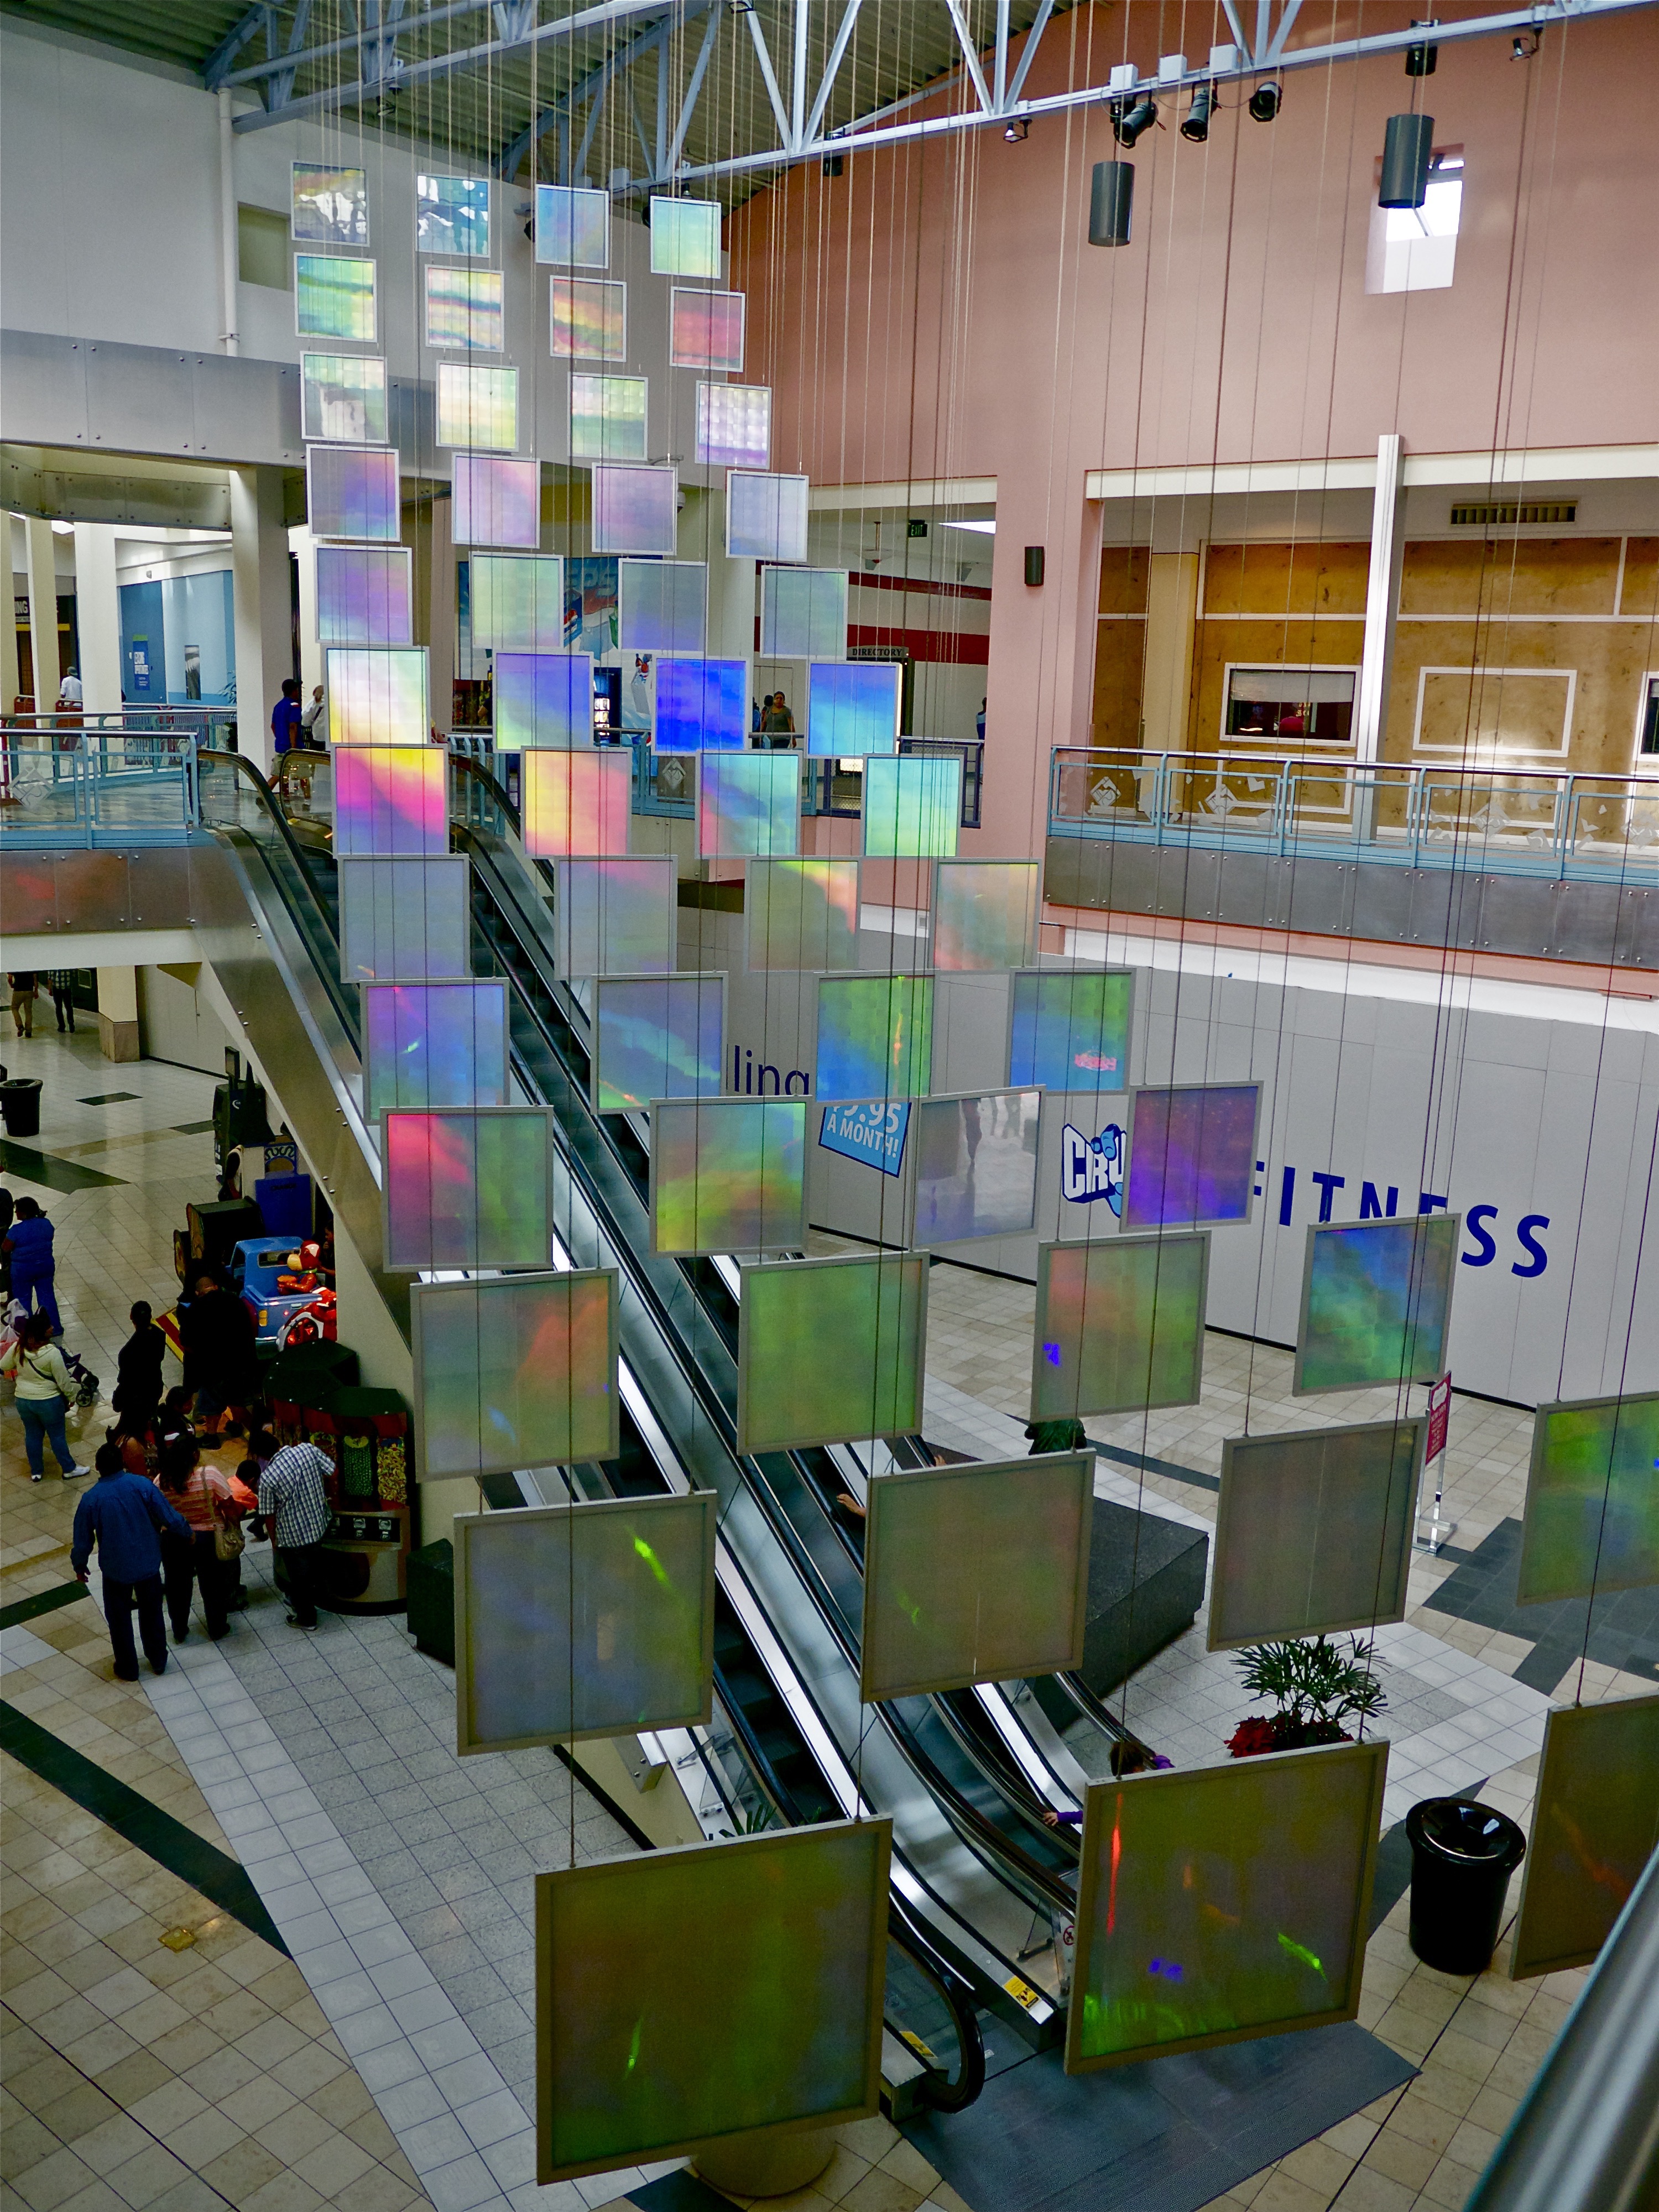 52, 36" x 36" suspended, glowing, colorful rainbow prism panels hang suspended in this light art installation